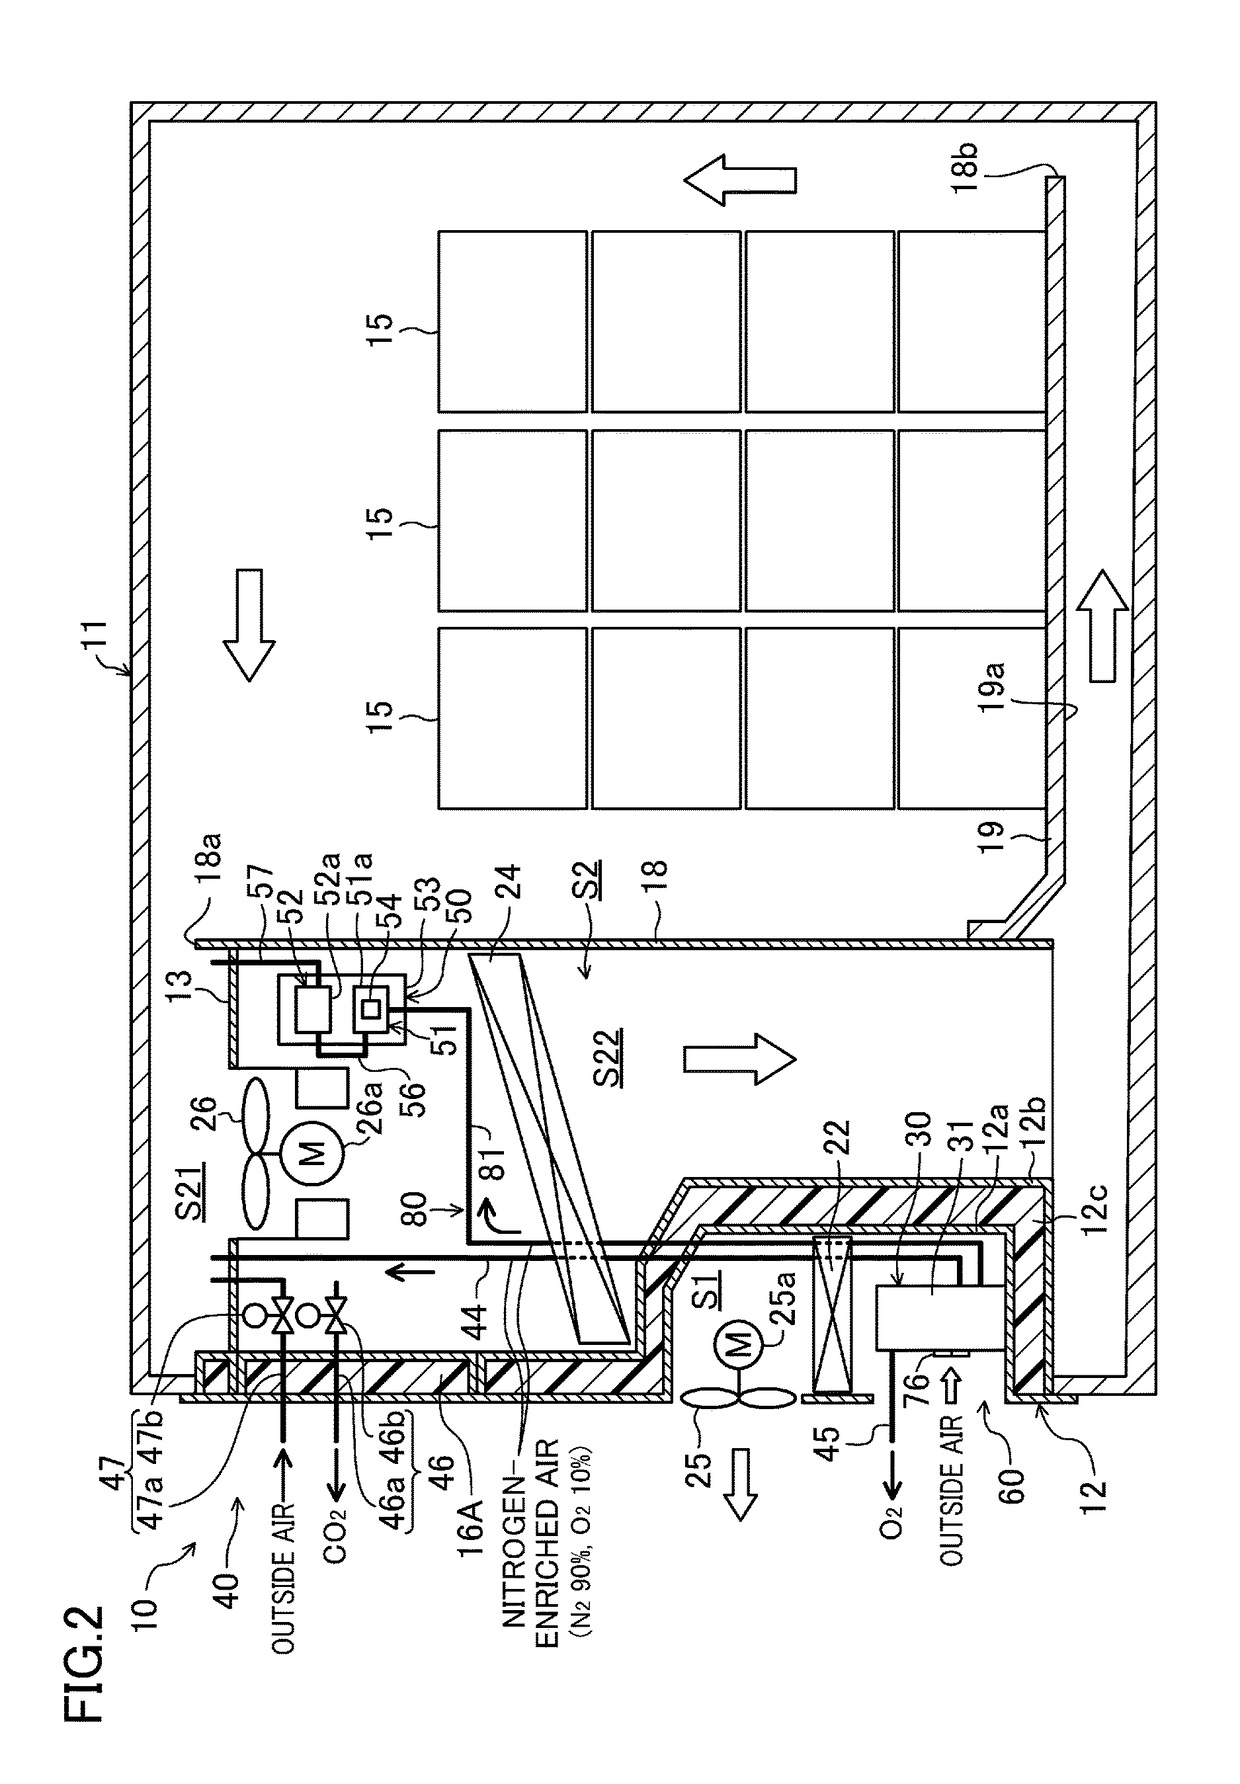 Refrigeration device for container